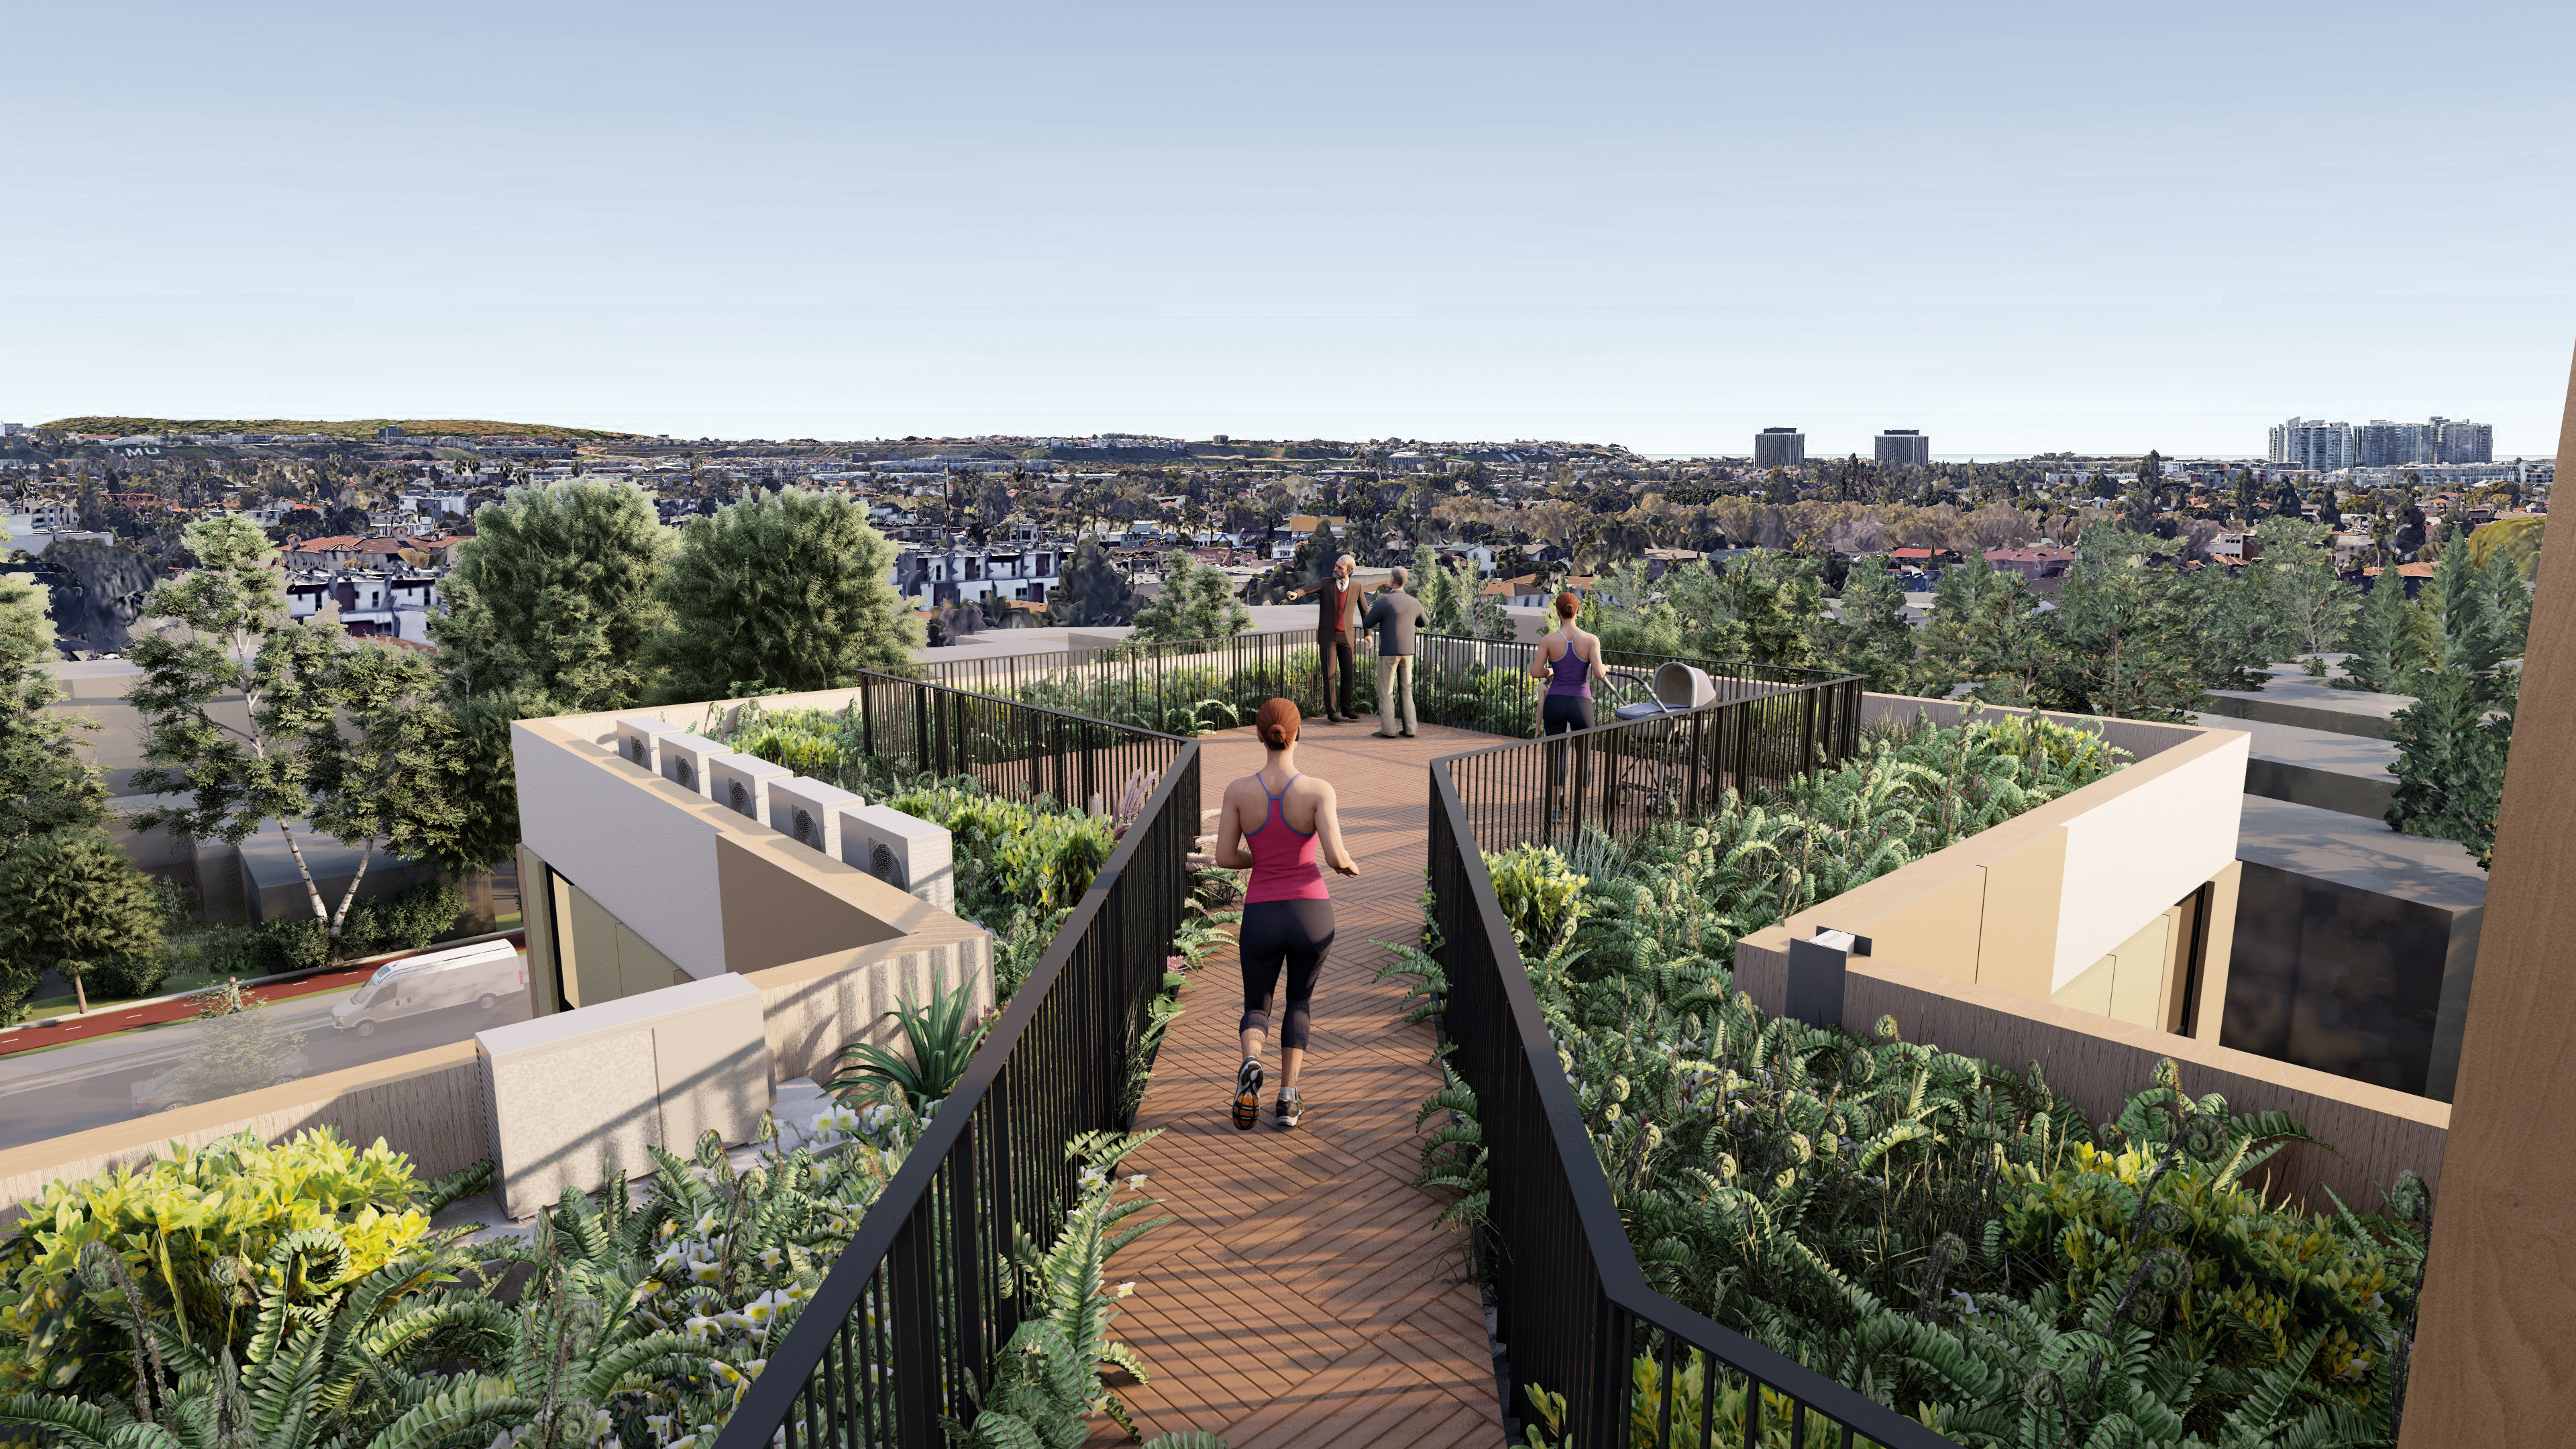 Rendering of property with background view. Rendering is from the rooftop patio perspective.